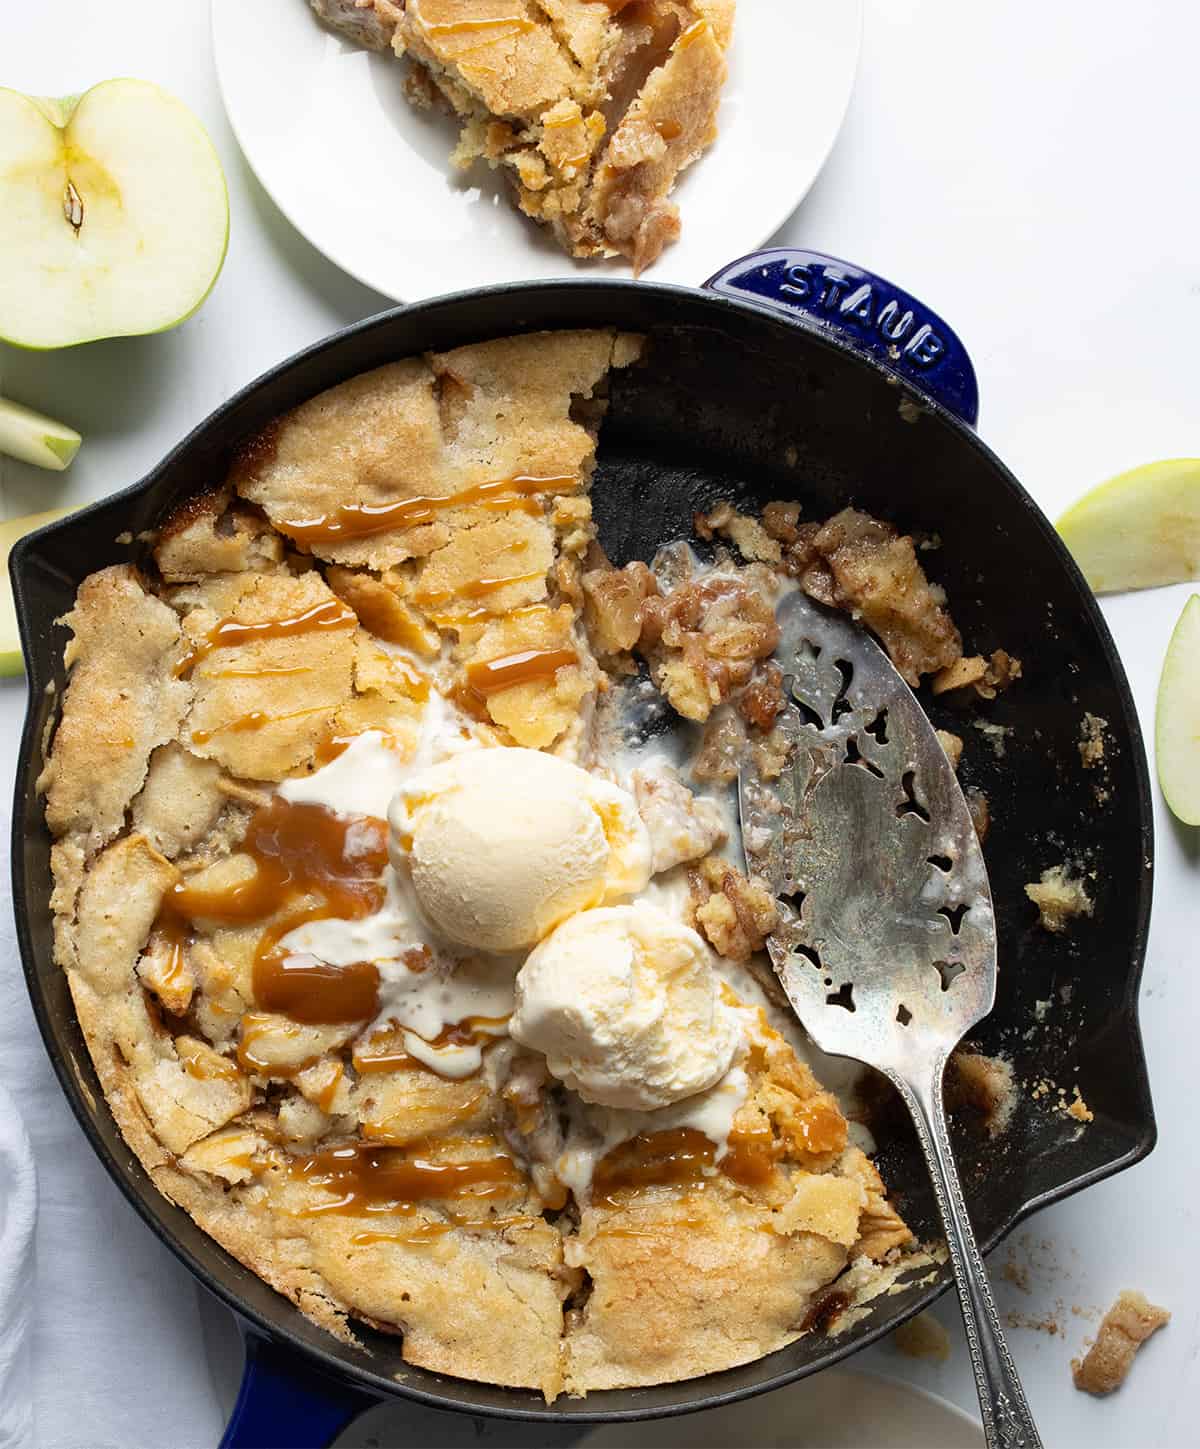 Swedish Apple Pie with Ice Cream and Some Pieces Removed.